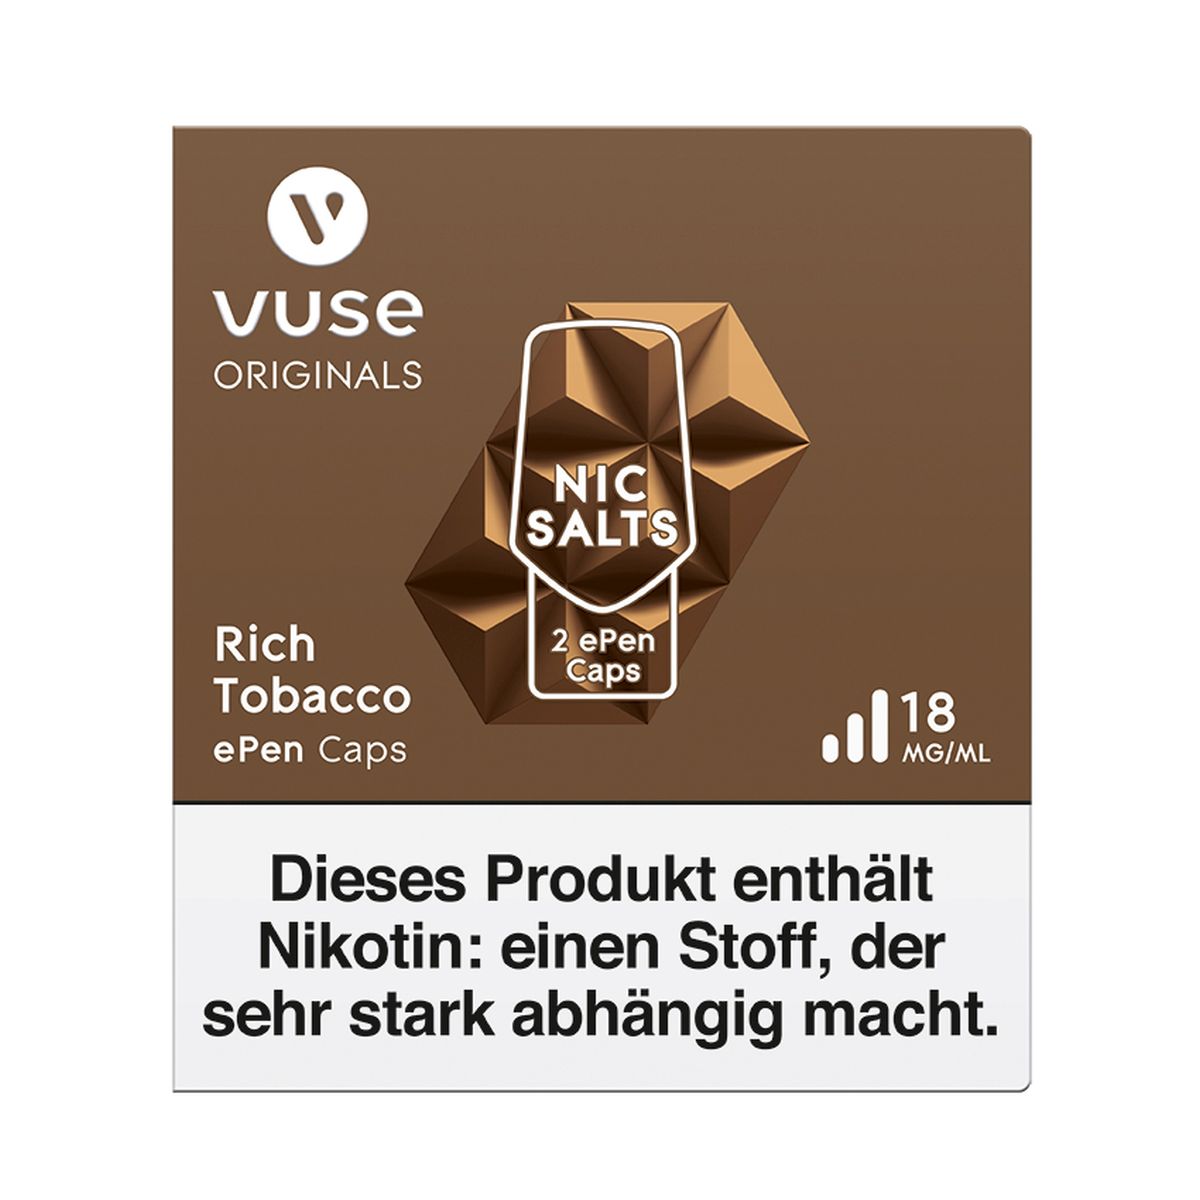 Vuse Vuse ePen Caps Rich Tobacco Nic Salts 18mg Nikotin 2ml bei www.Tabakring.de kaufen